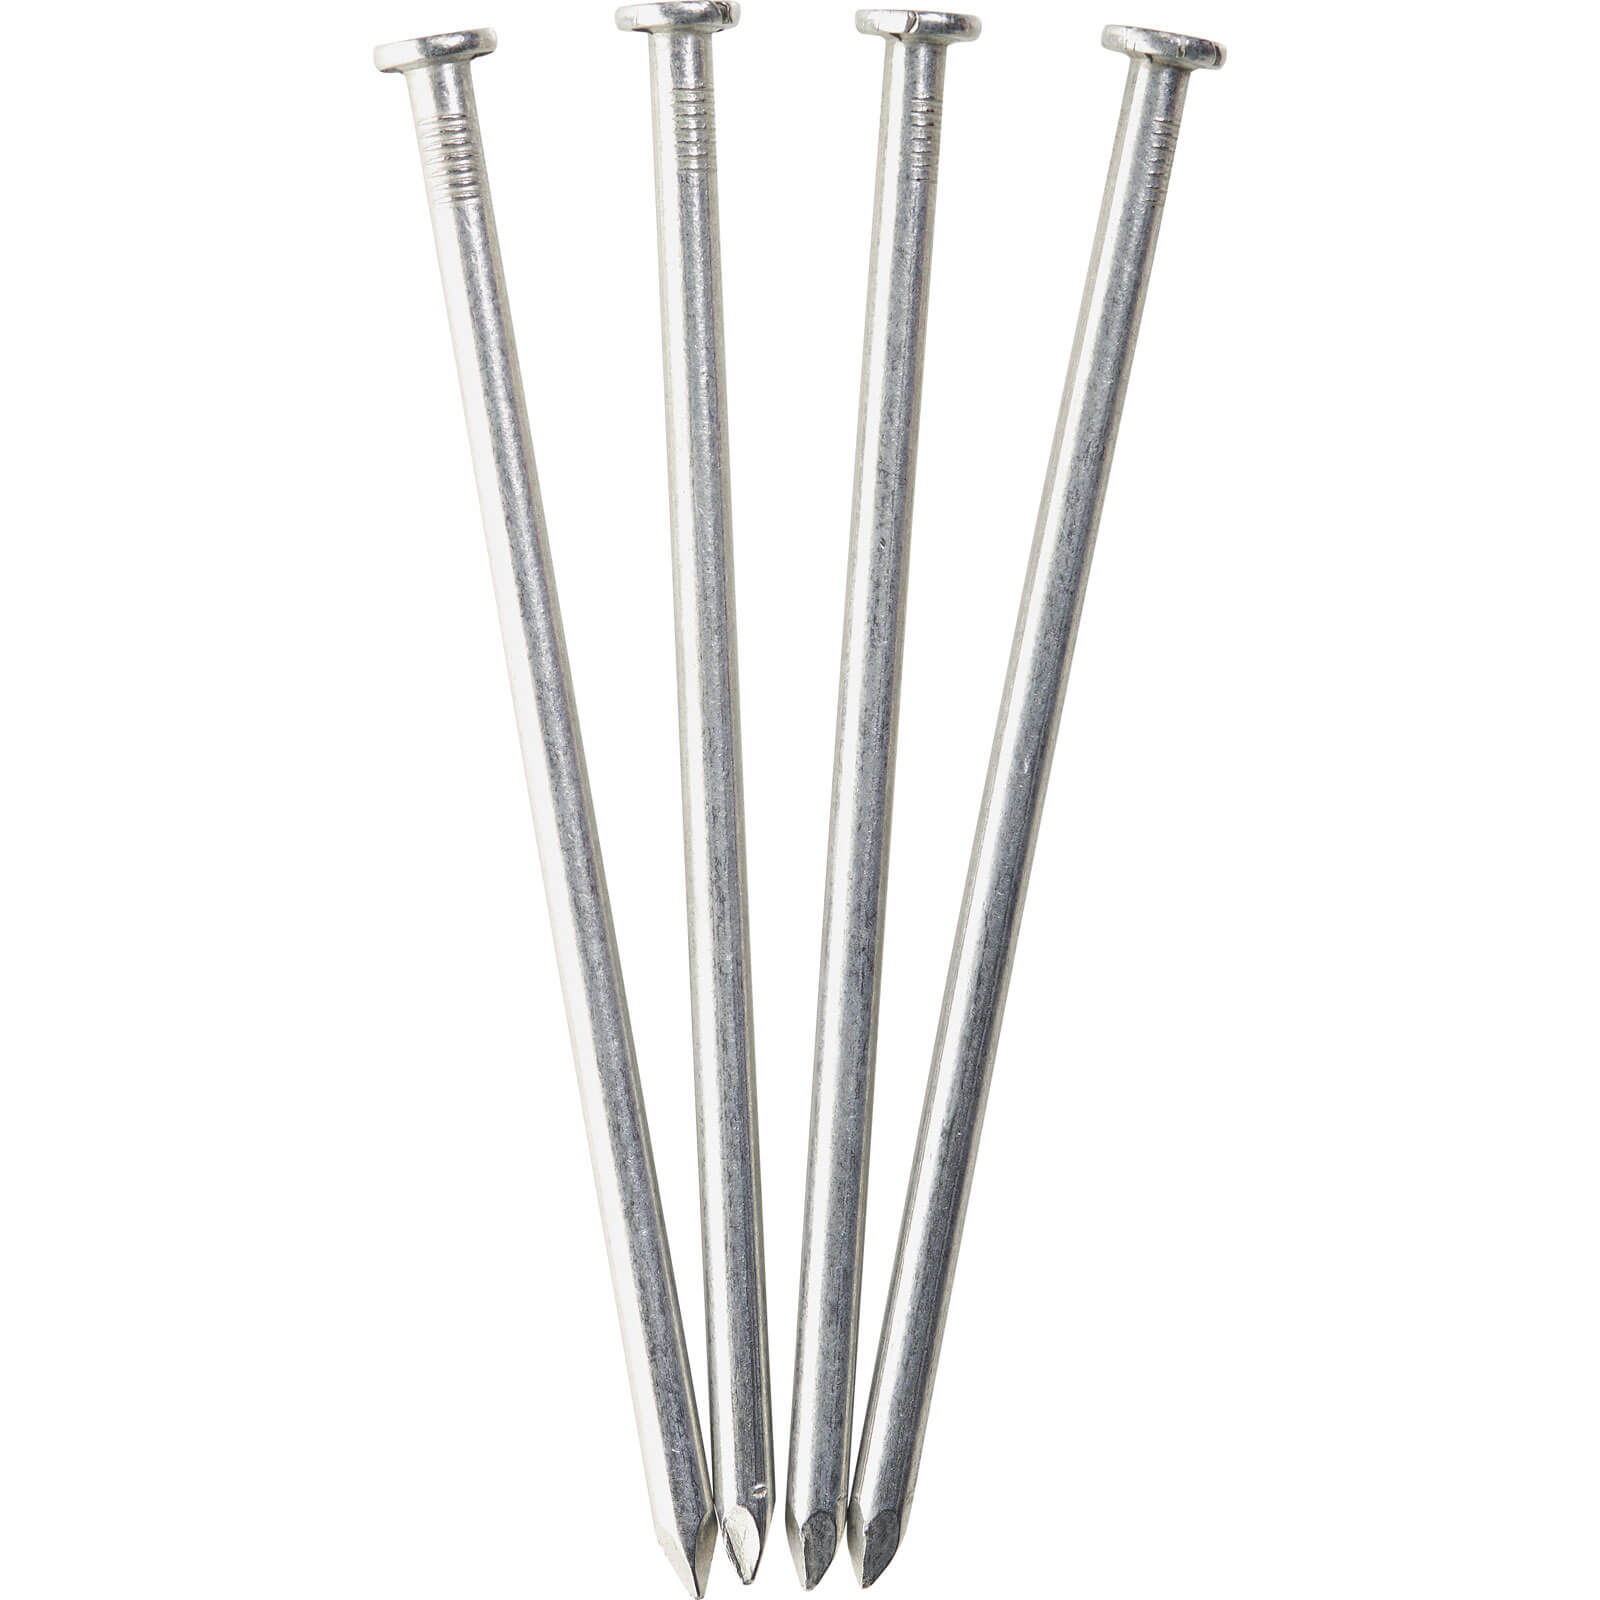 Bosch Pack of 4 Base Station Nails for Indego Robotic Lawn Mowers